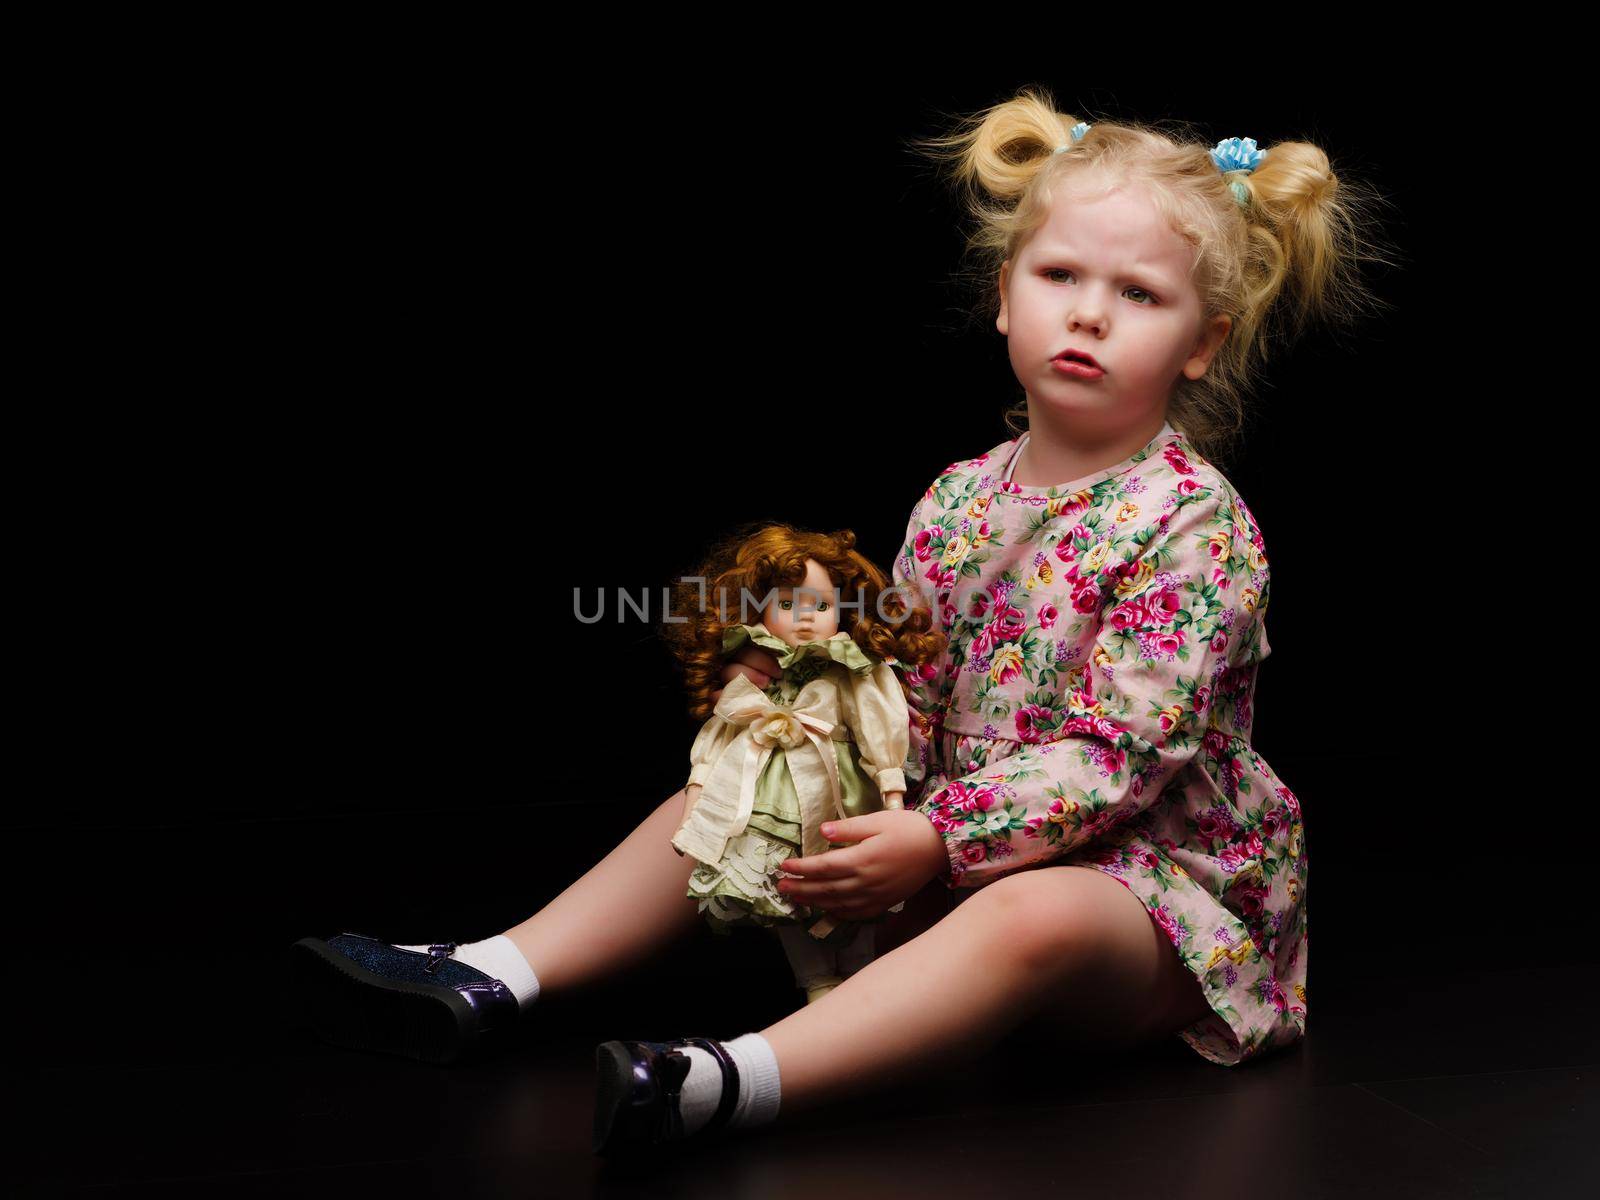 A little girl plays with a doll on a black background. by kolesnikov_studio